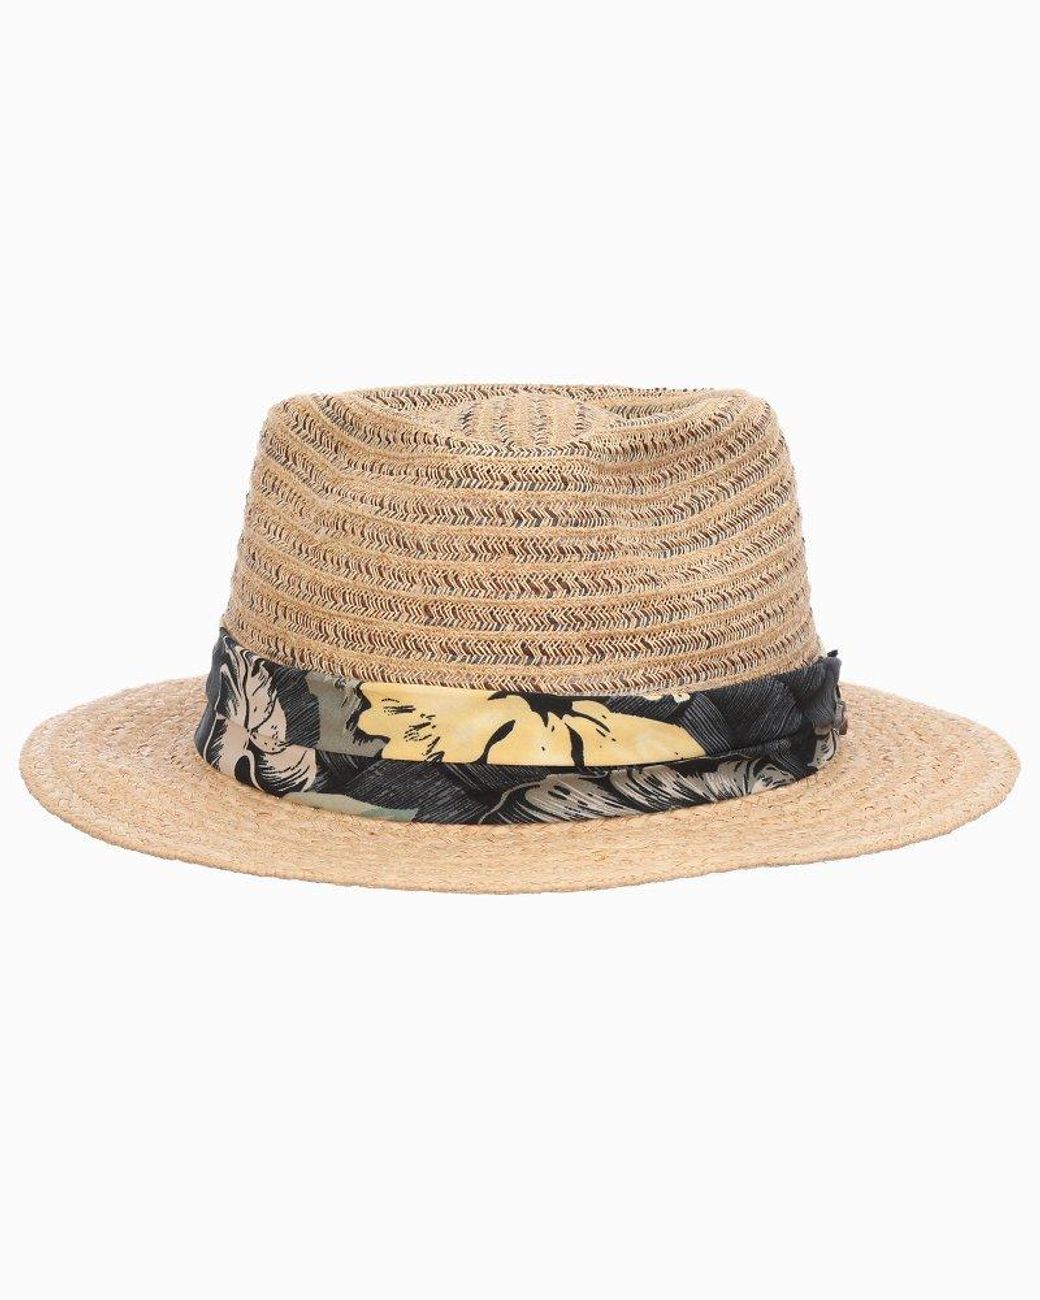 Tommy Bahama Mens Paper Toyo Fedora Hat New Without Tags Natural 